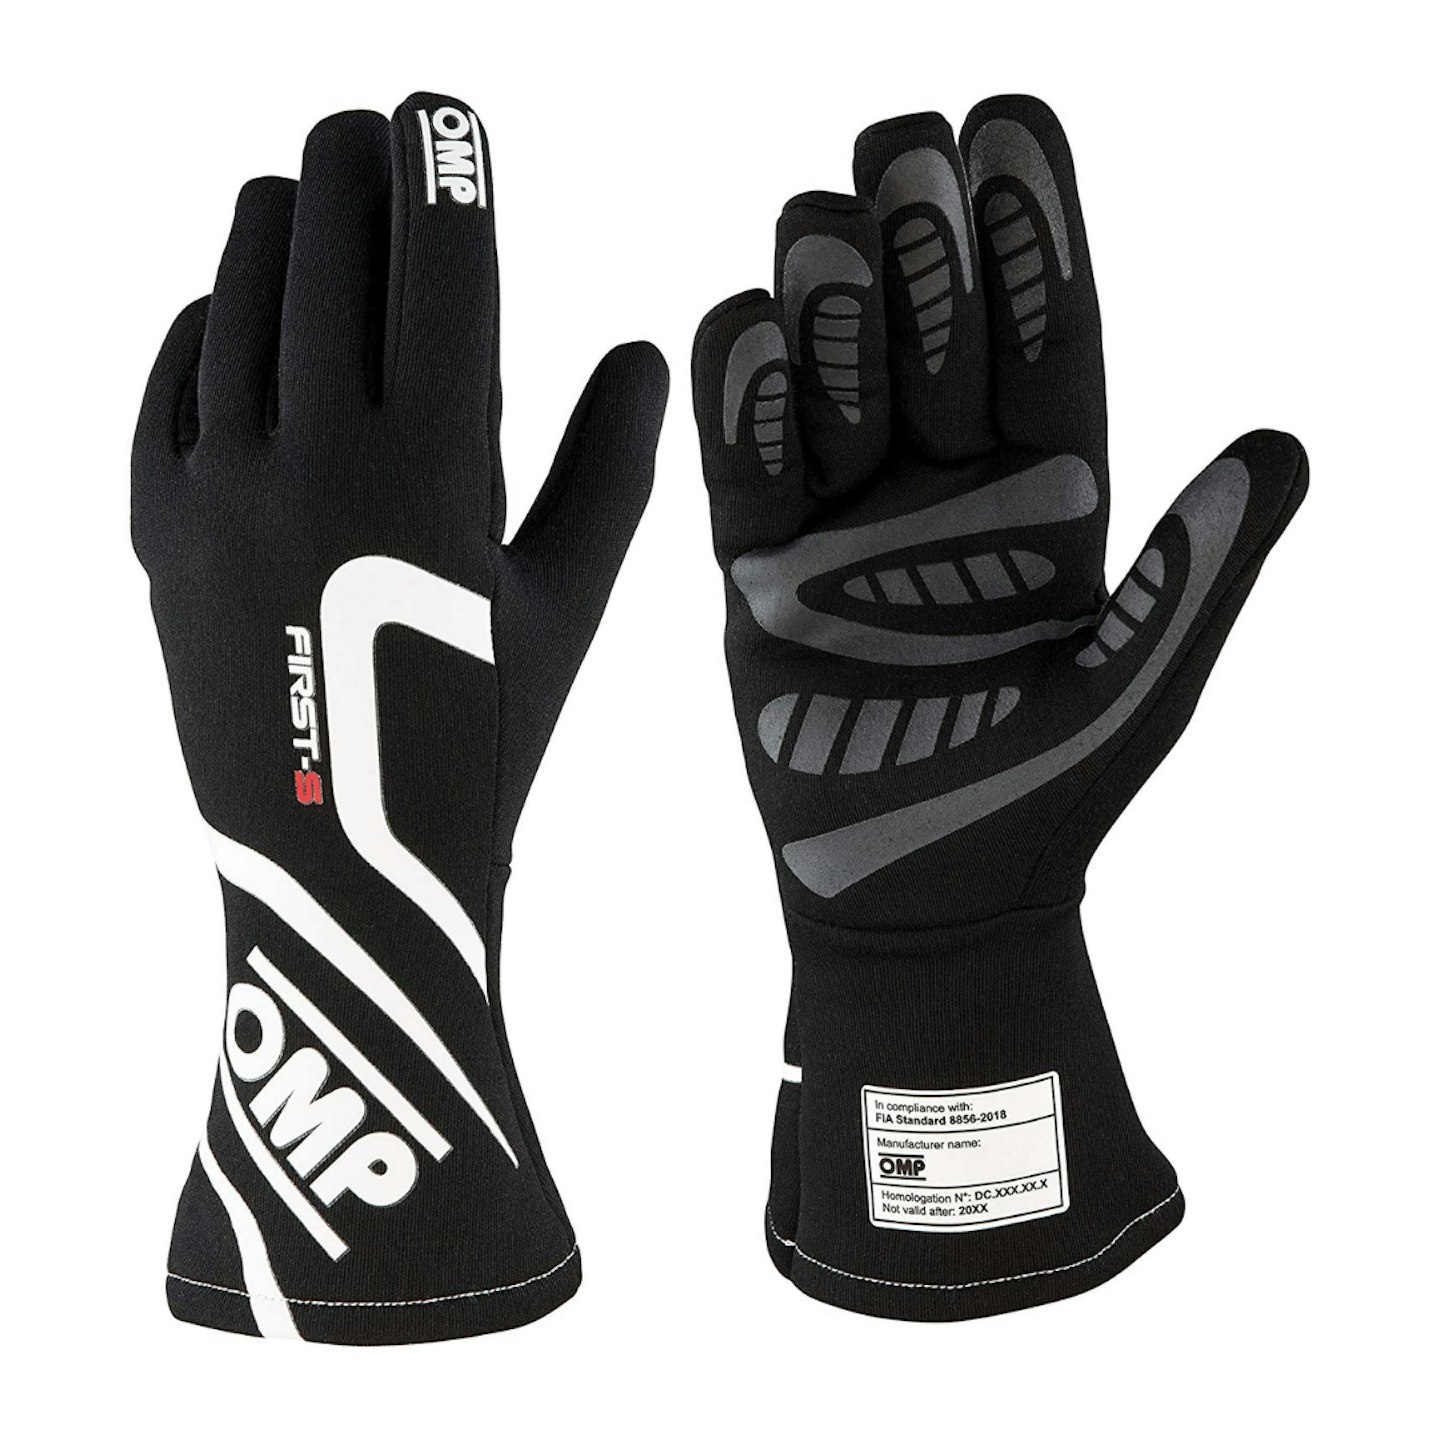 OMP race driving gloves for track days